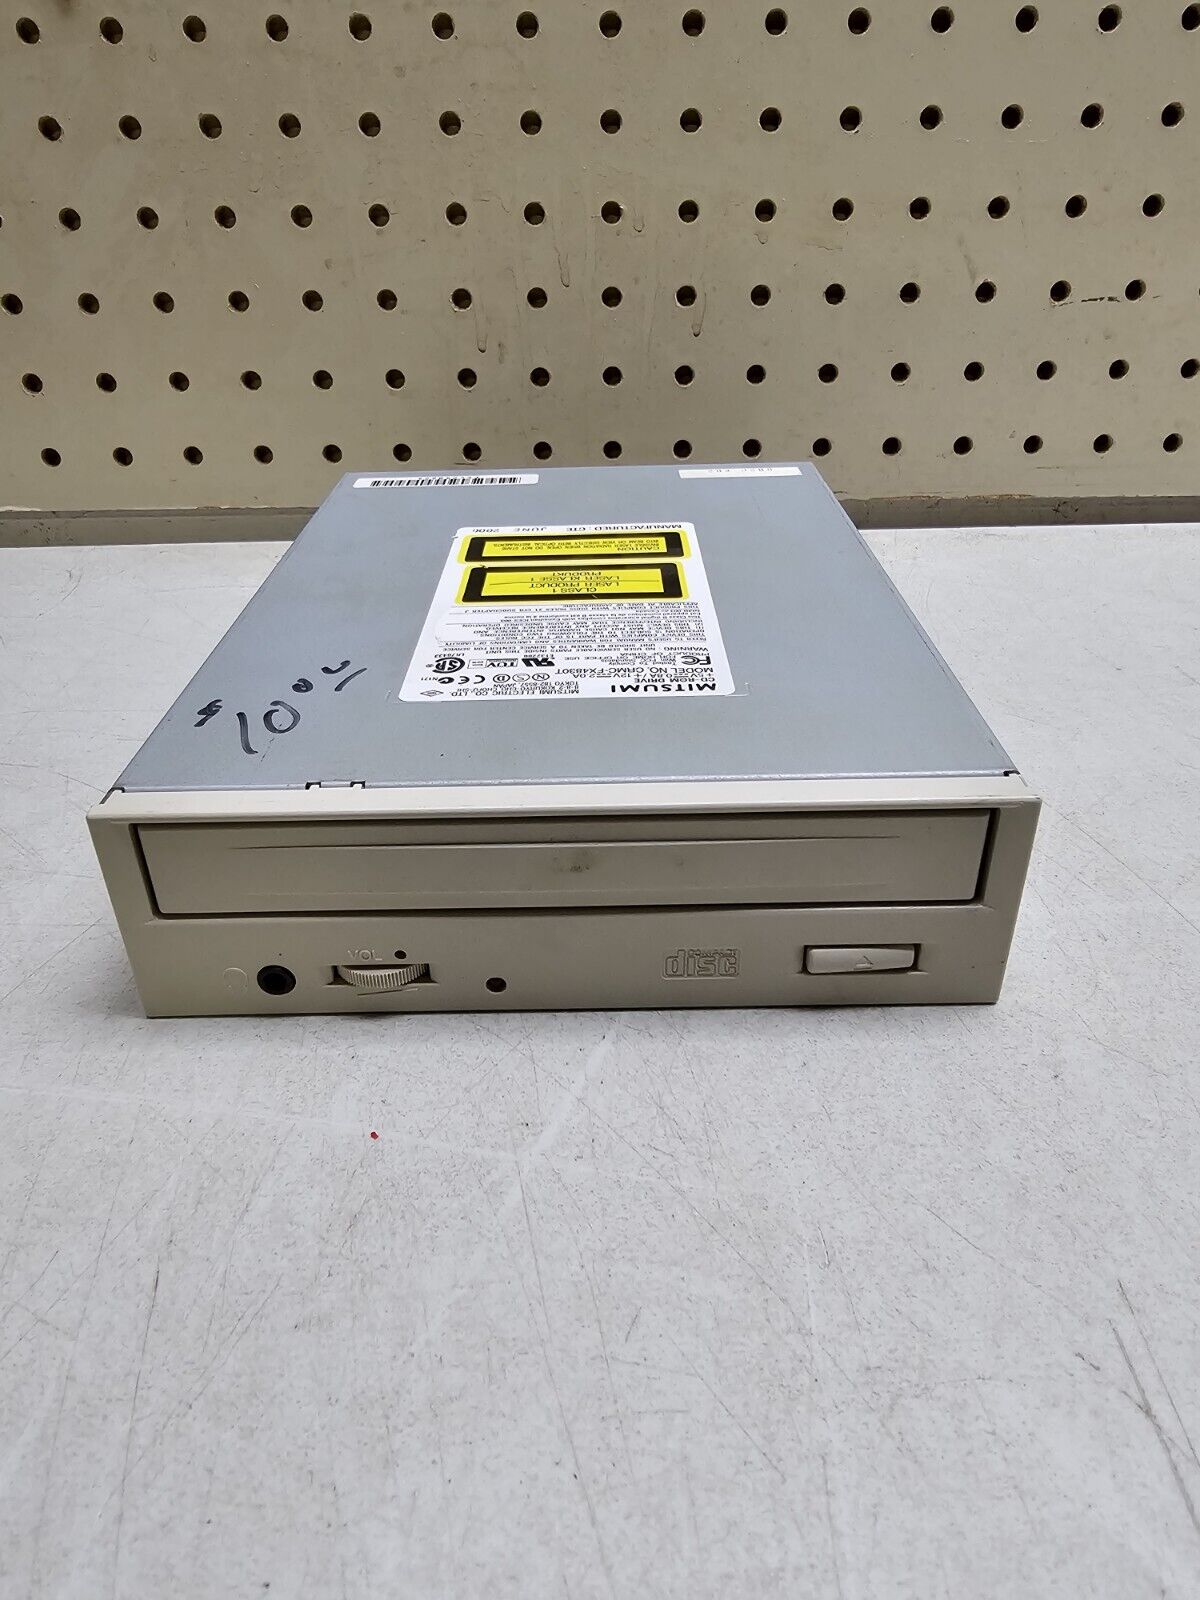 Vintage Mitsumi CD-ROM Drive Model: CRMC-FX4830T Tested and Works 